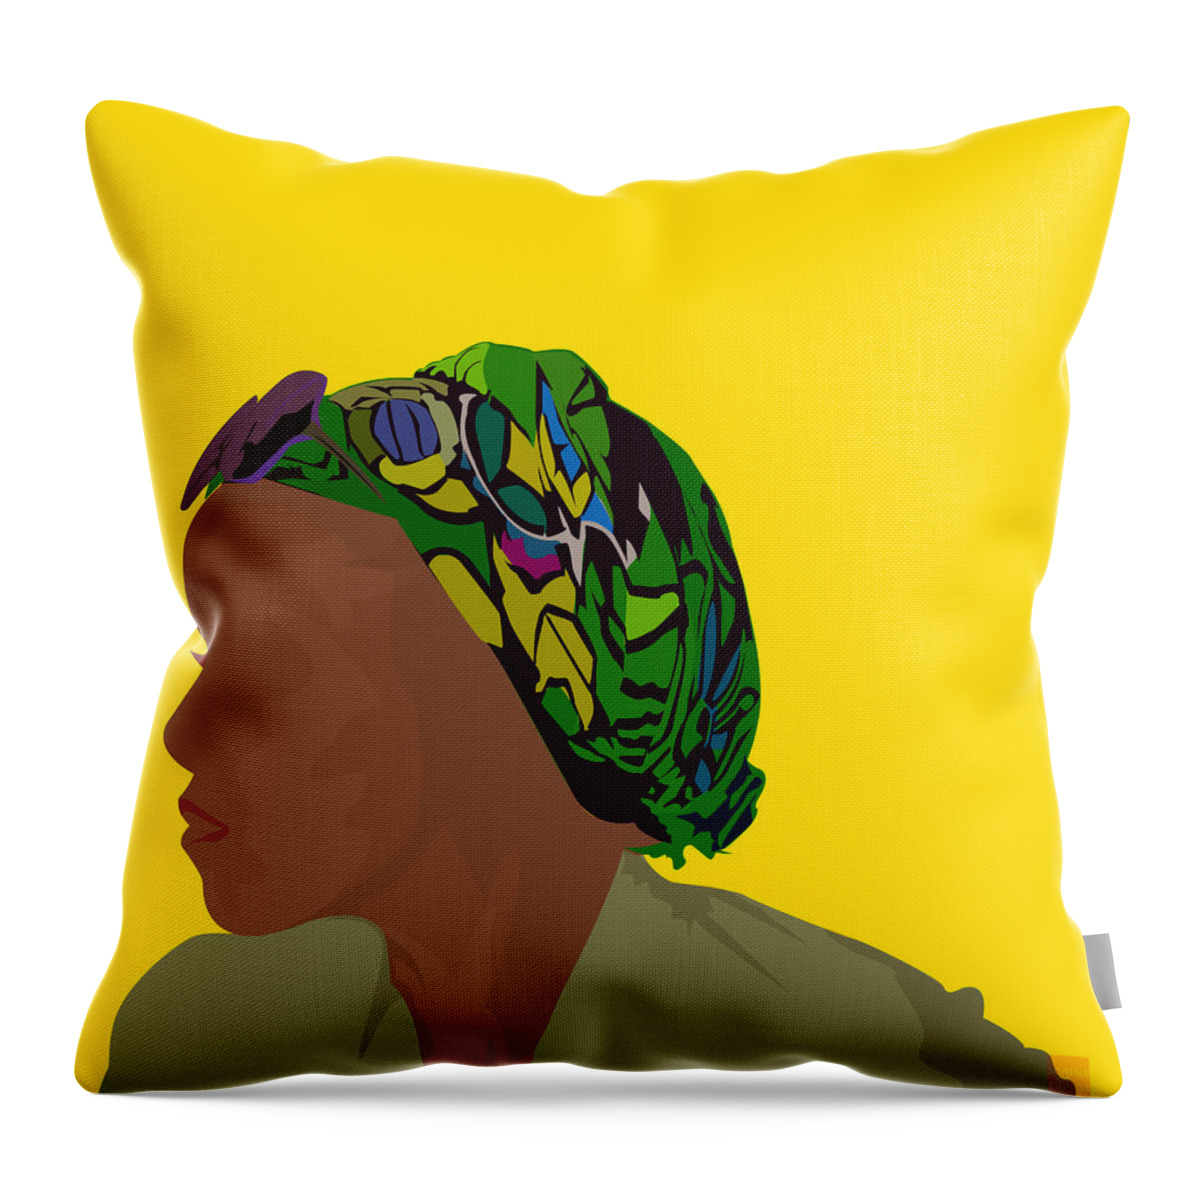 Scheme Of Things Throw Pillow featuring the digital art Colorful by Scheme Of Things Graphics